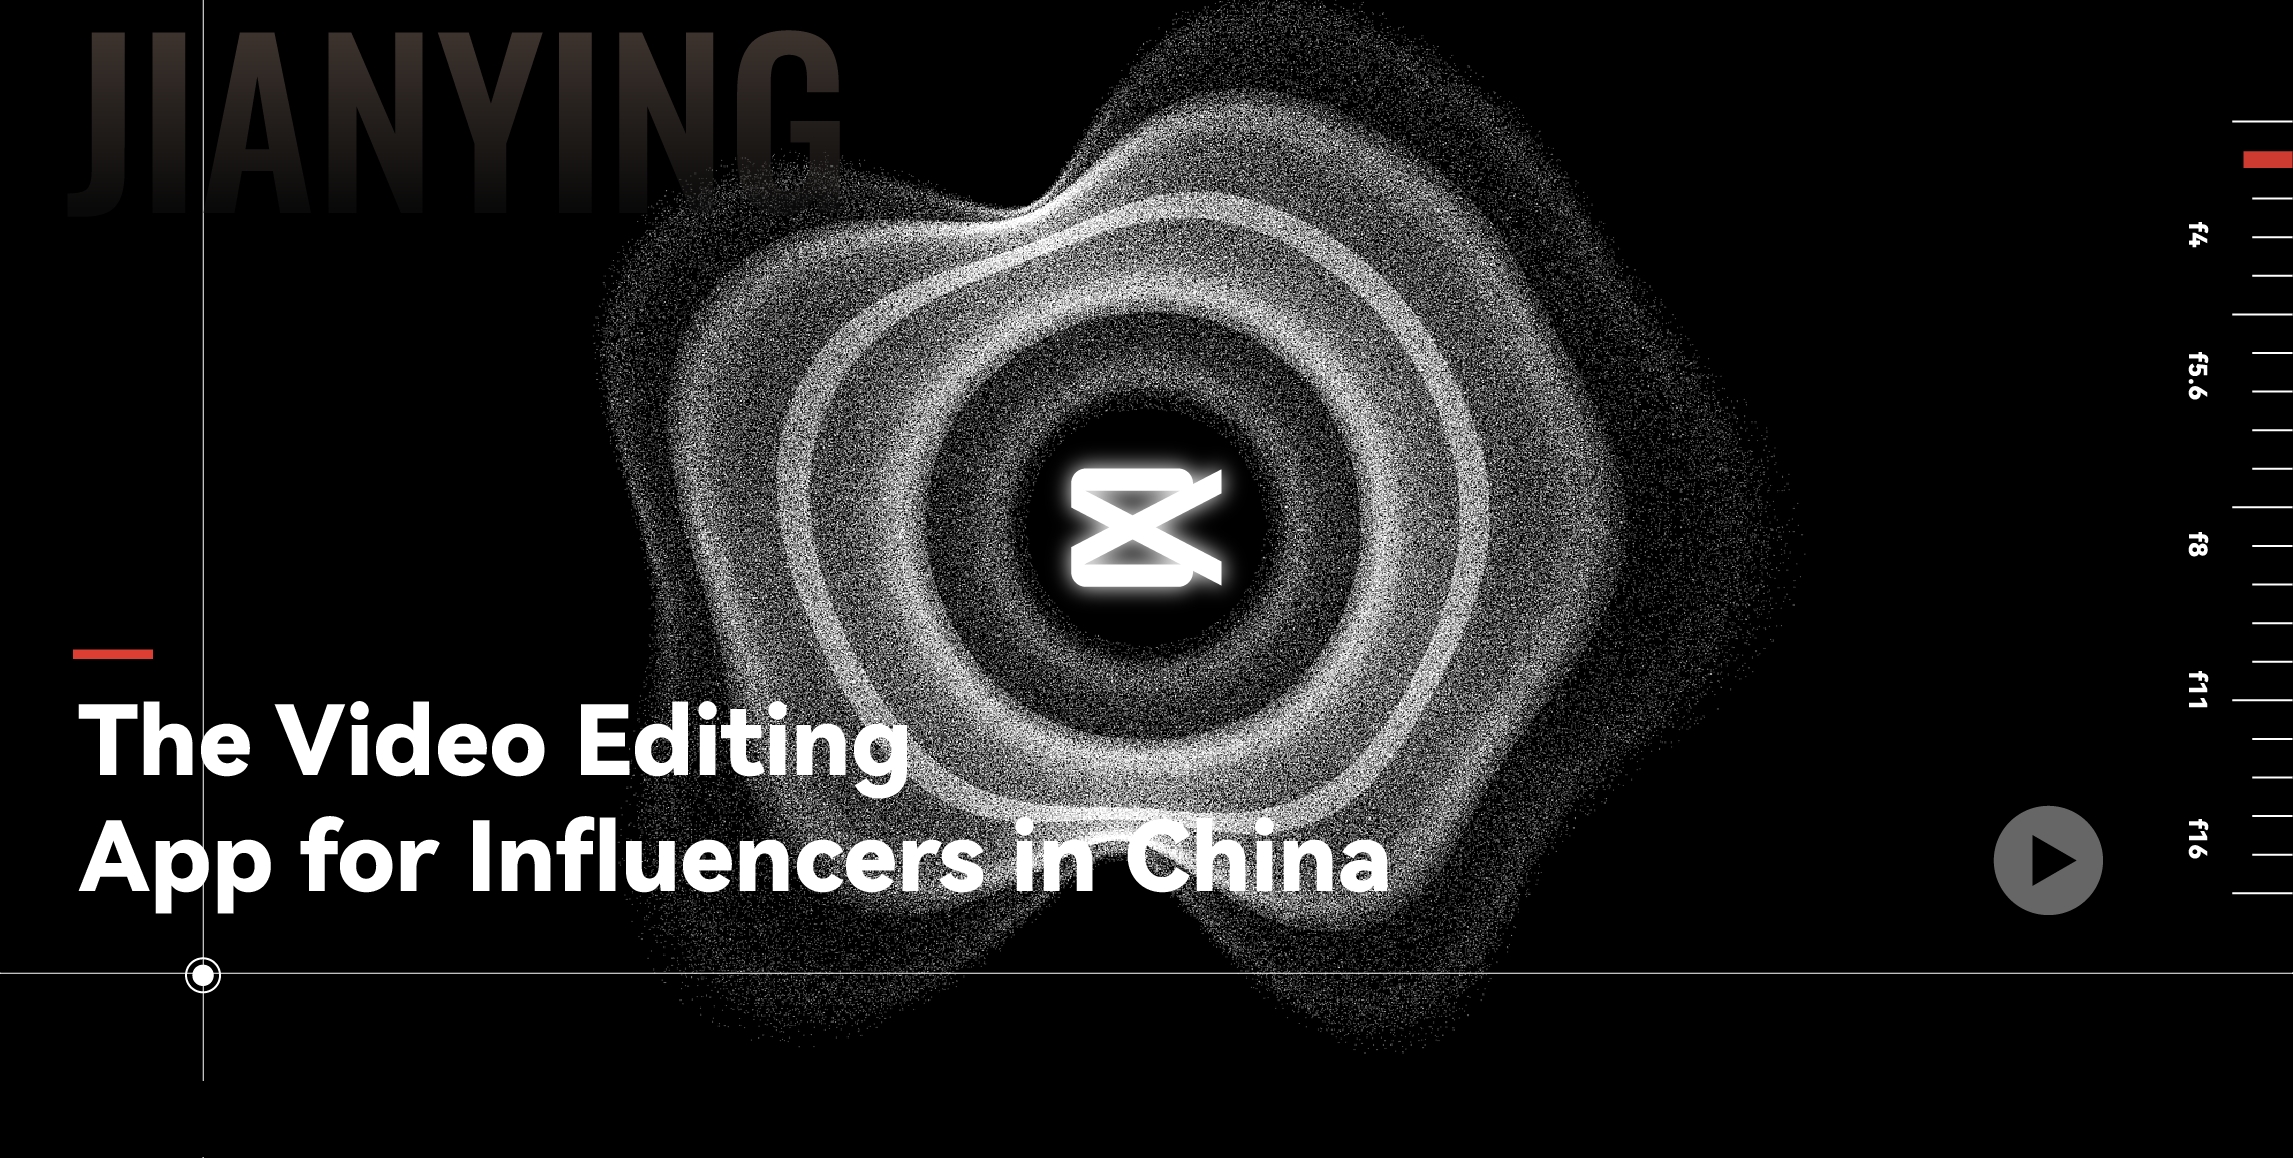 Jianying: Video Editing App for Influencers in China